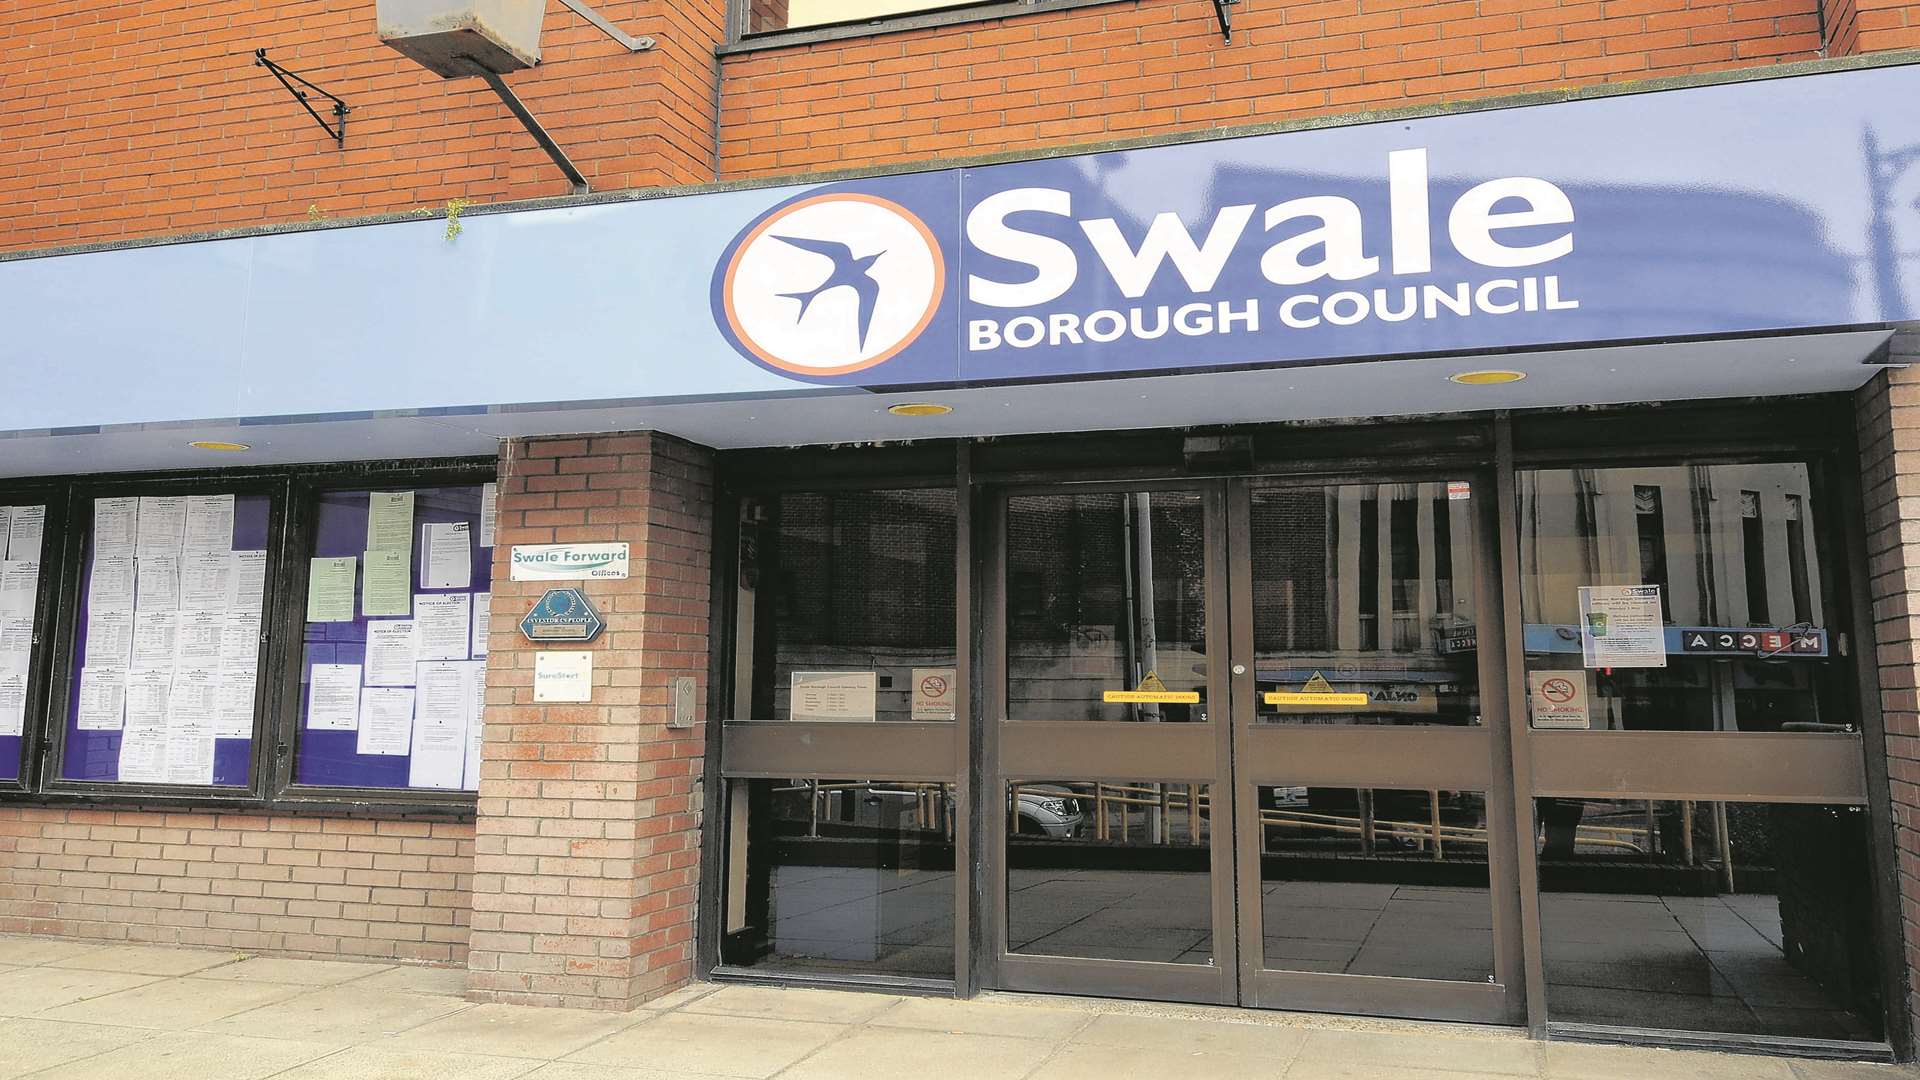 Swale council's head office, Swale House